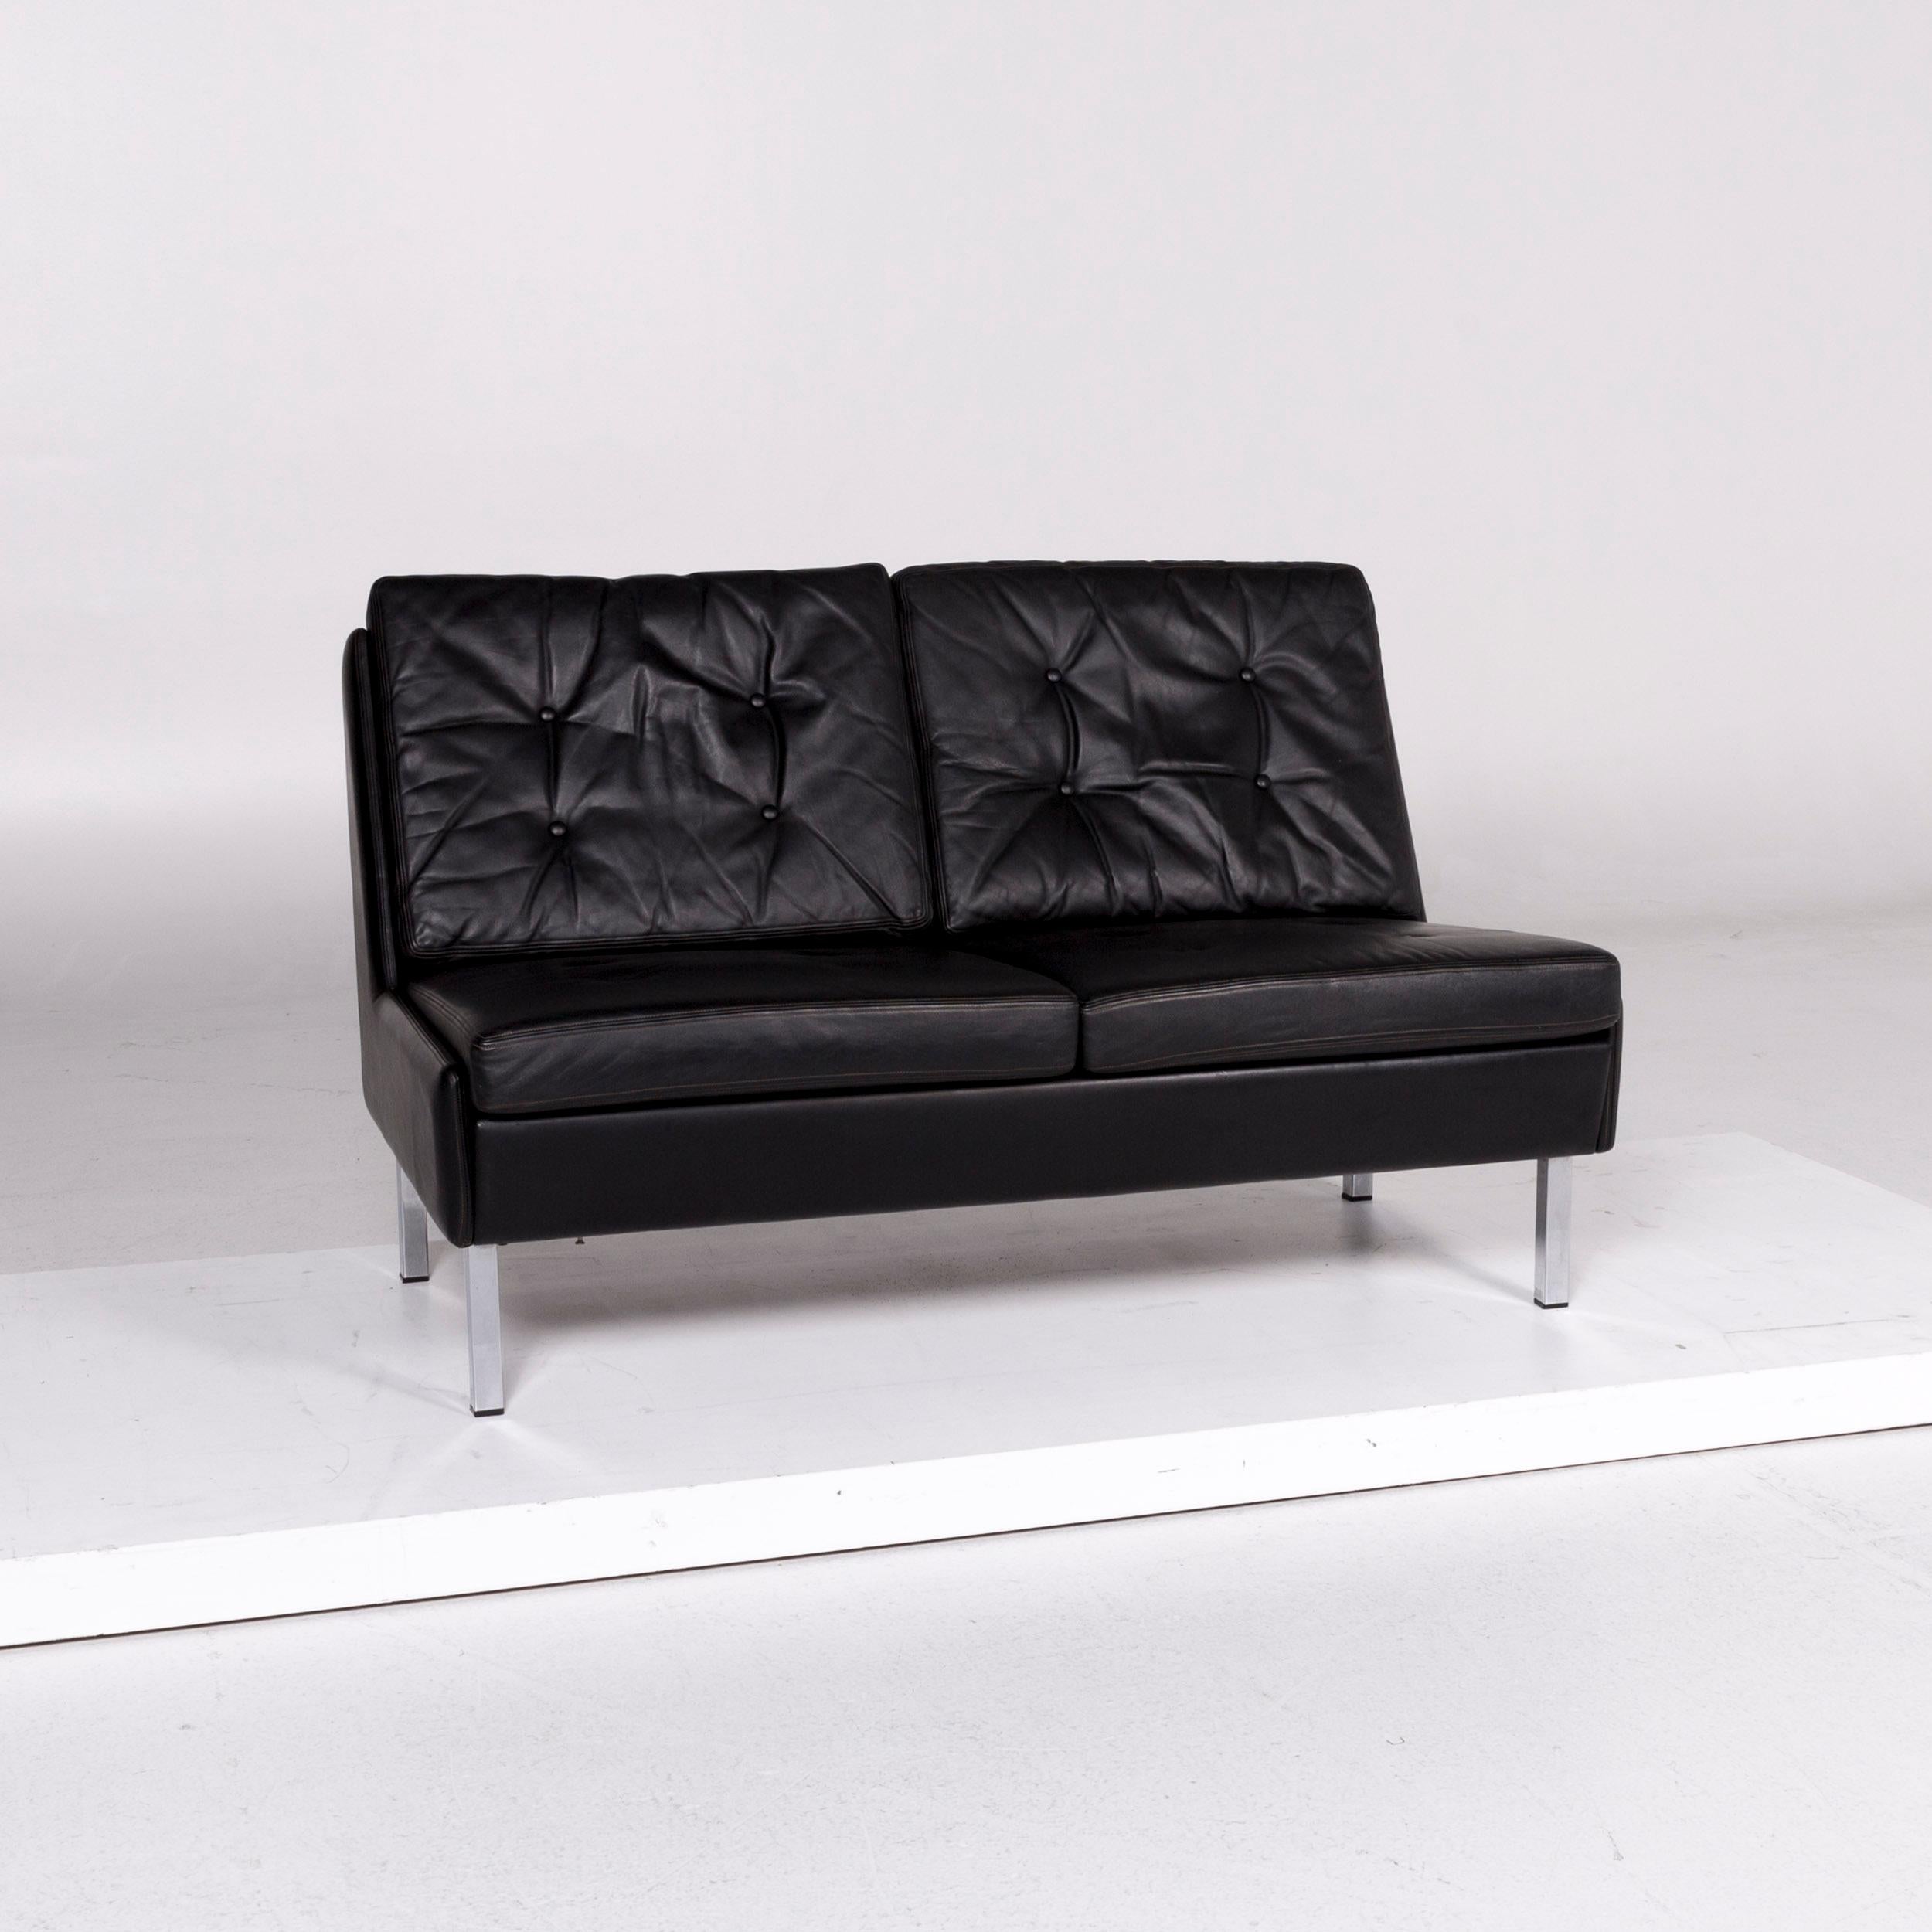 We bring to you a Cassina leather sofa black two-seat couch.

Product measurements in centimeters:

Depth 81
Width 131
Height 83
Seat-height 45
Seat-depth 52
Seat-width 131
Back-height 38.
 
  